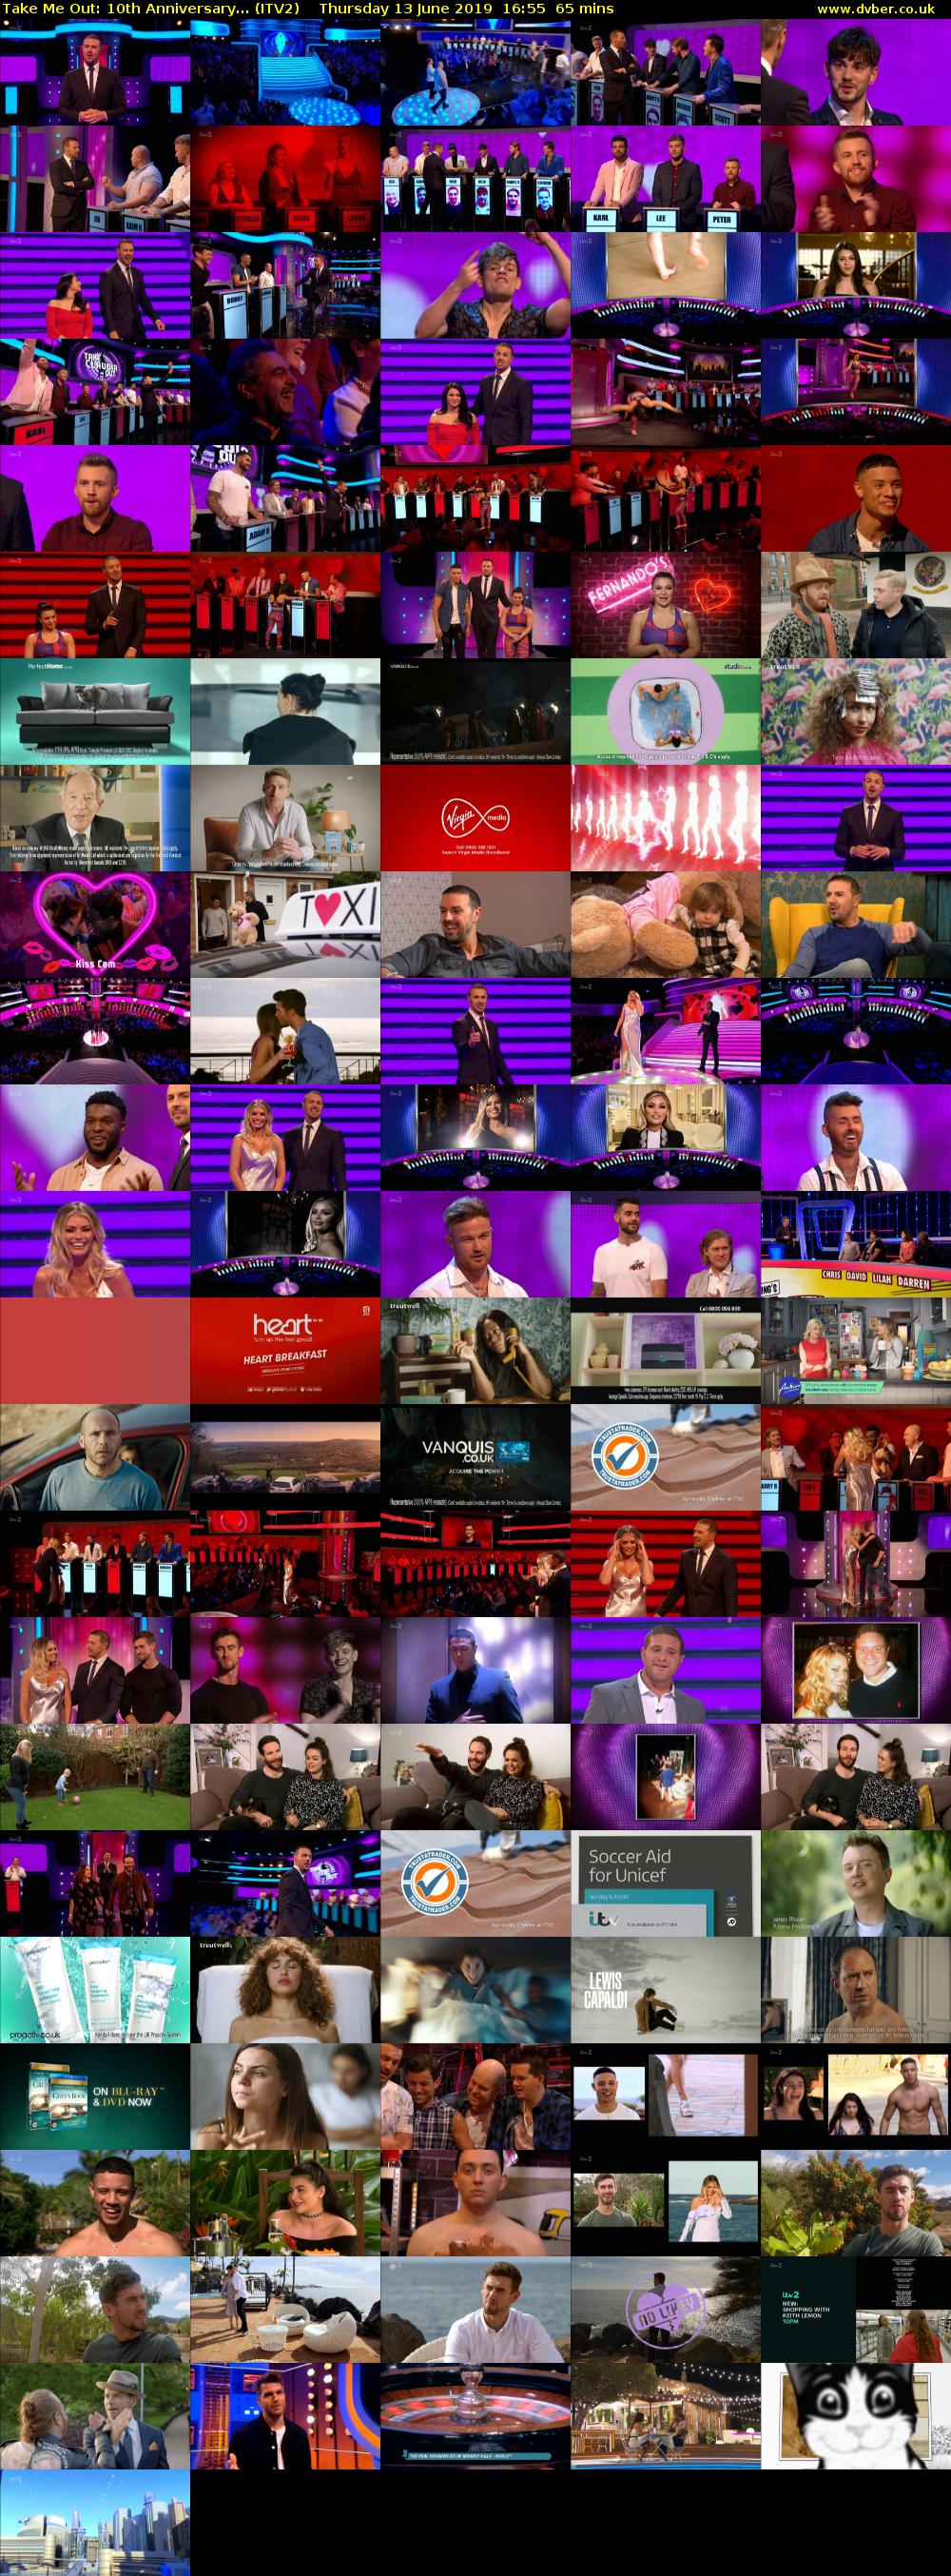 Take Me Out: 10th Anniversary... (ITV2) Thursday 13 June 2019 16:55 - 18:00